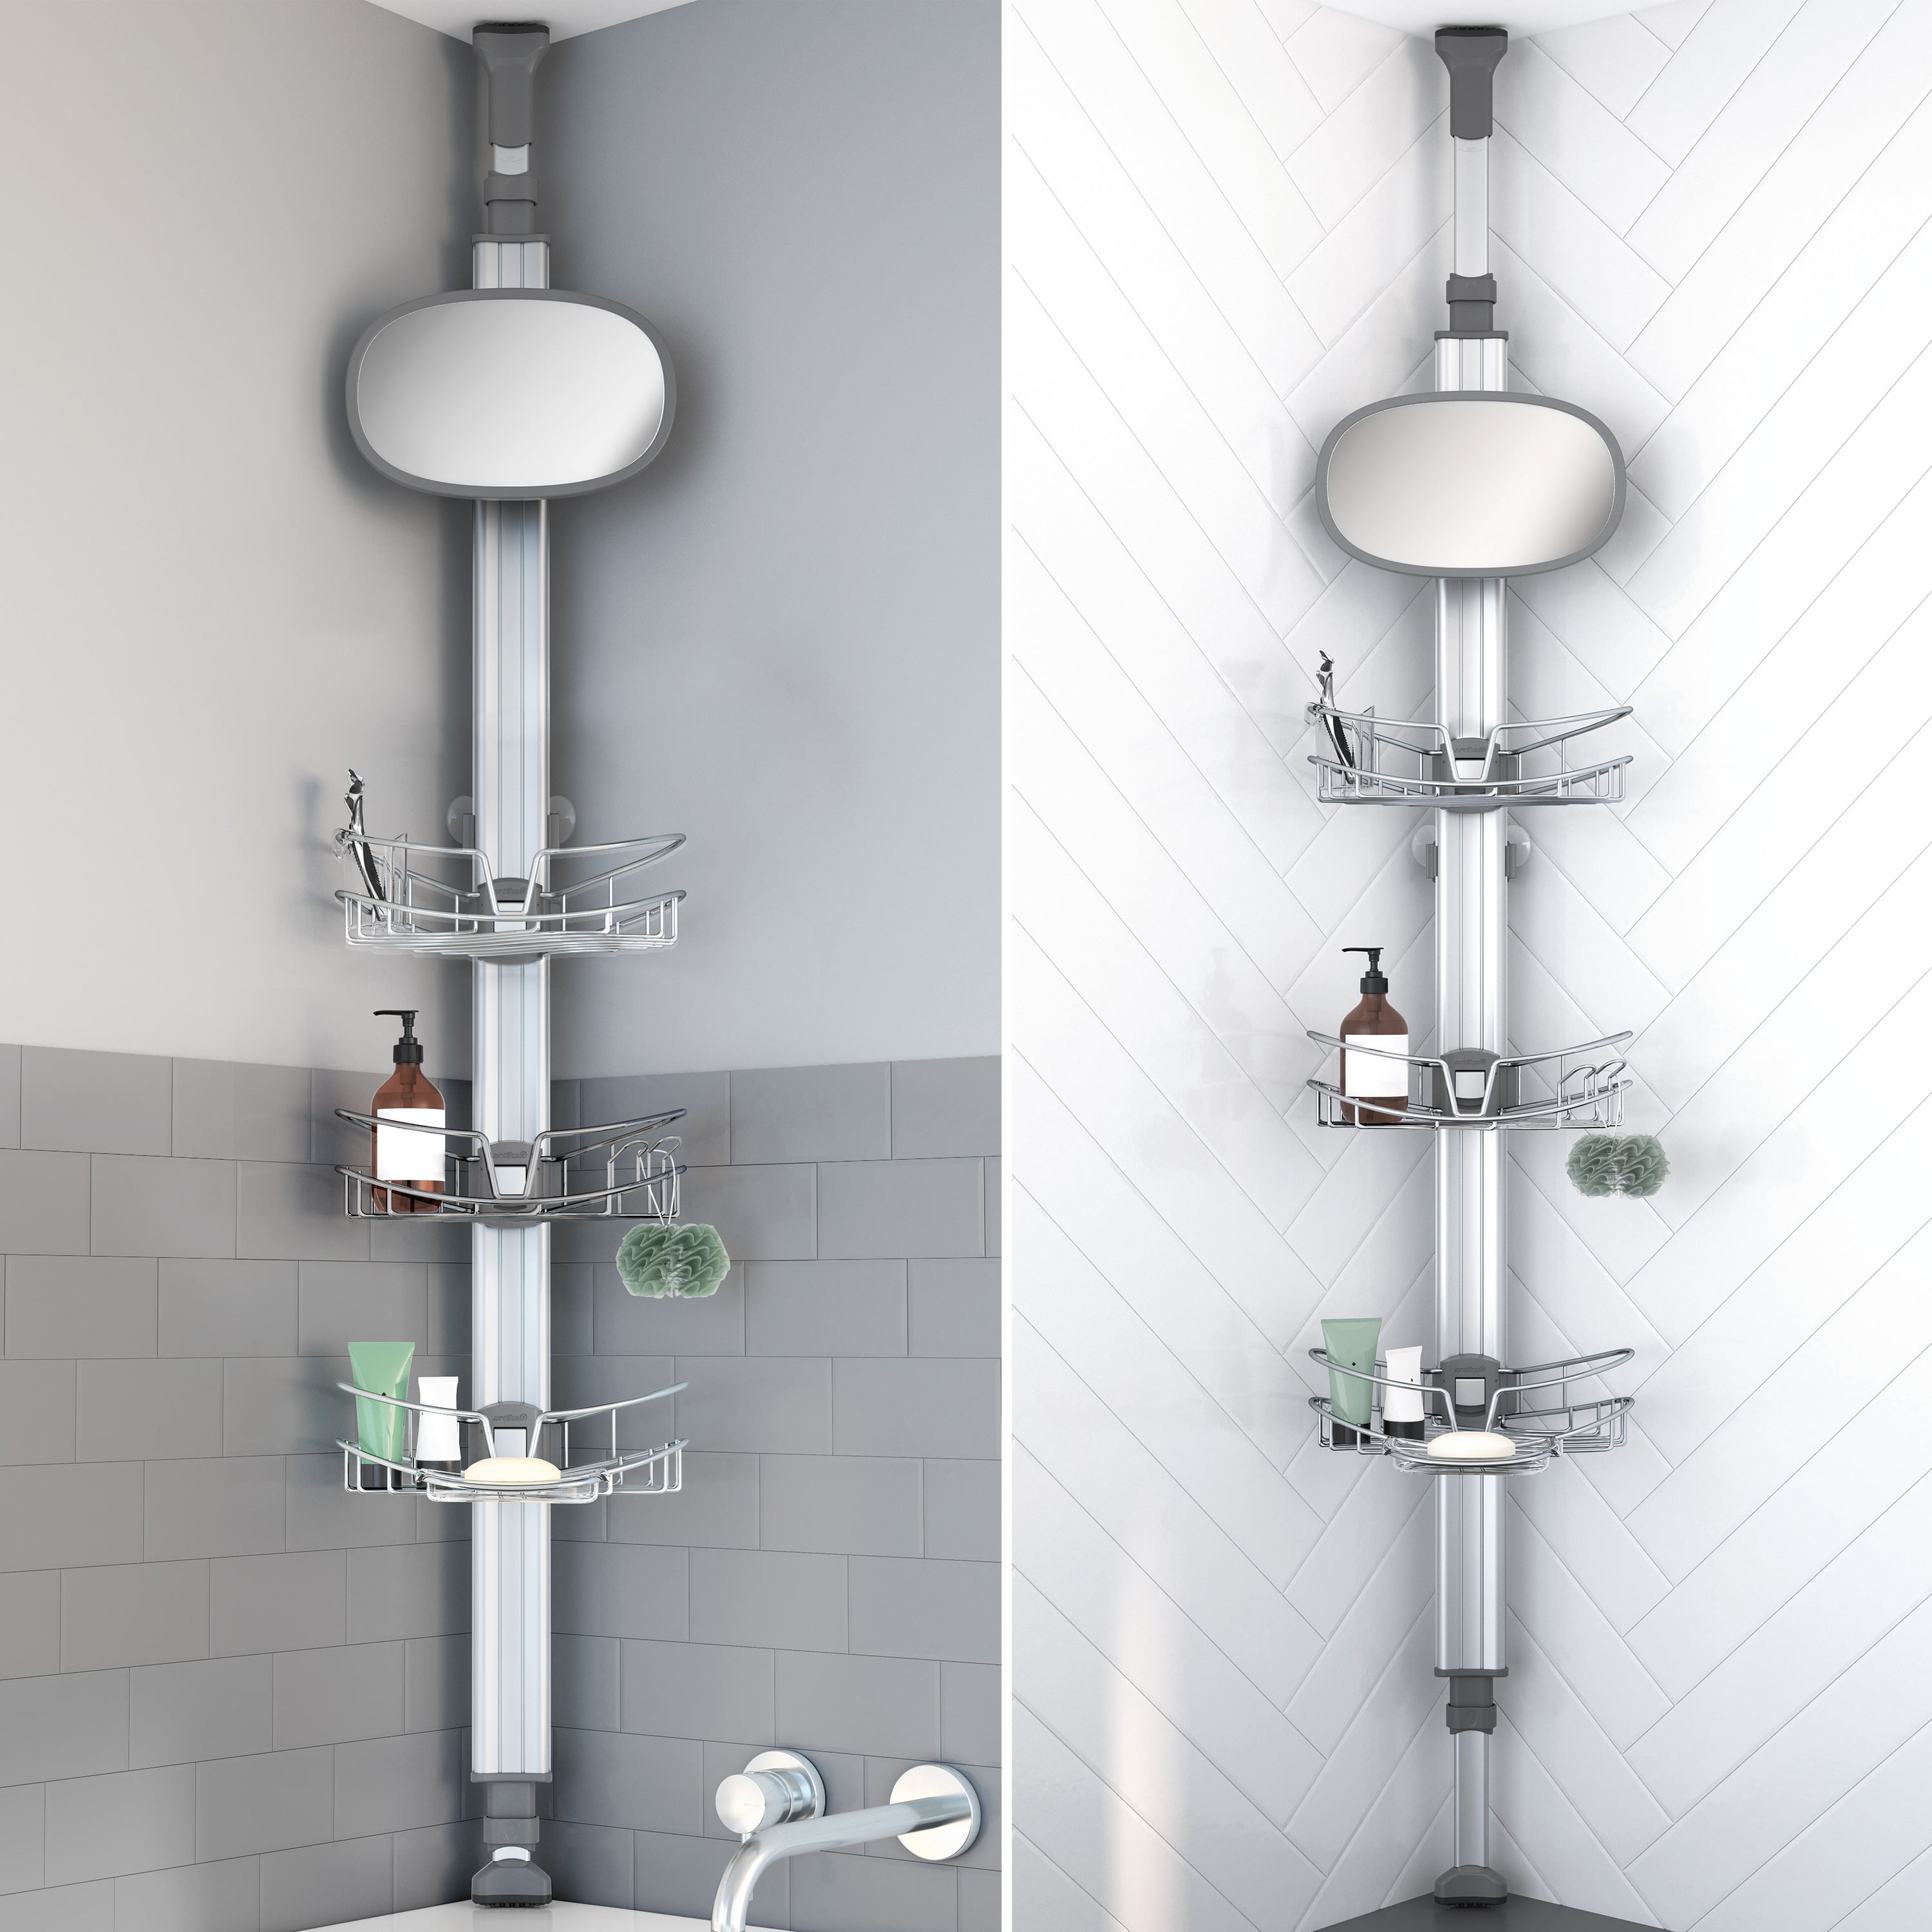 Artika Neptune SC-NEP3-C Extendable Shower Caddy with 1 Mirror and  Adjustable Racks and Shelves, Stainless Steel 99.99 - Quarter Price